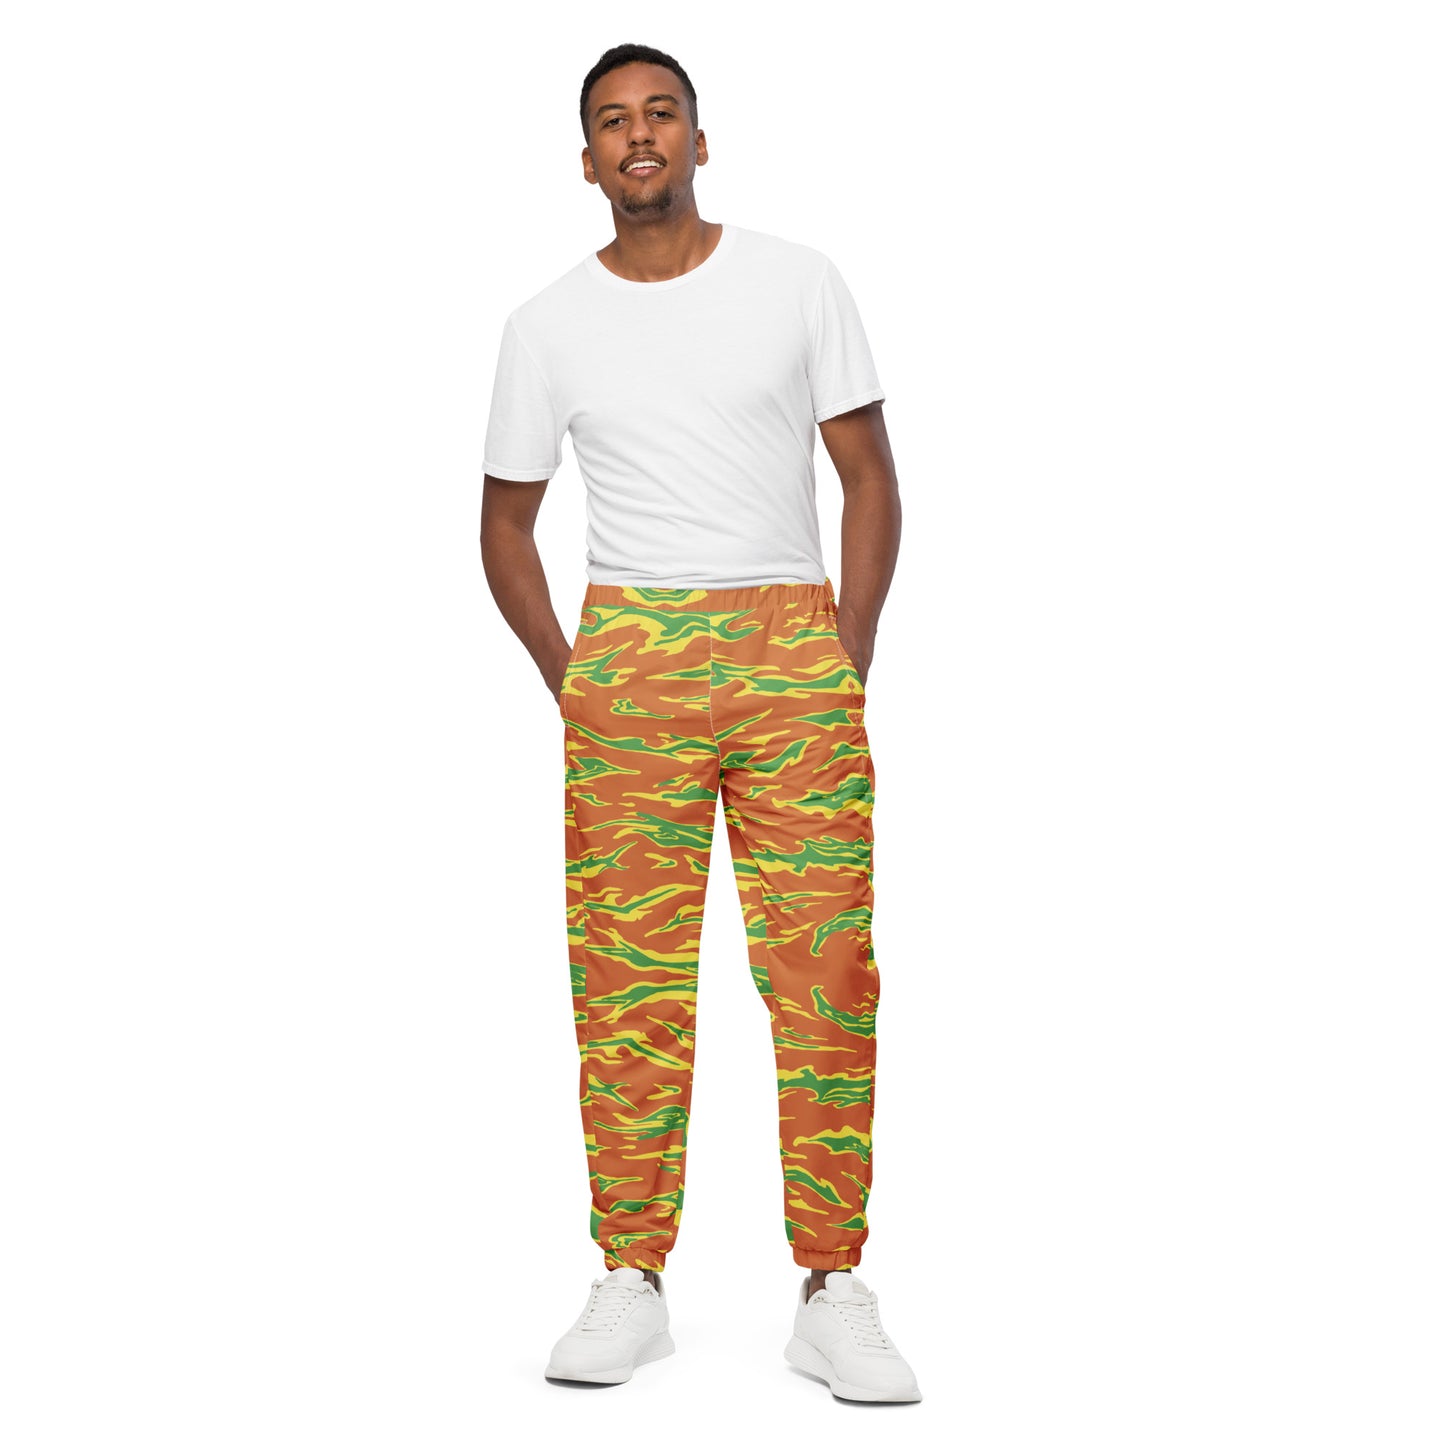 Unisex track pants "Tang Edition"